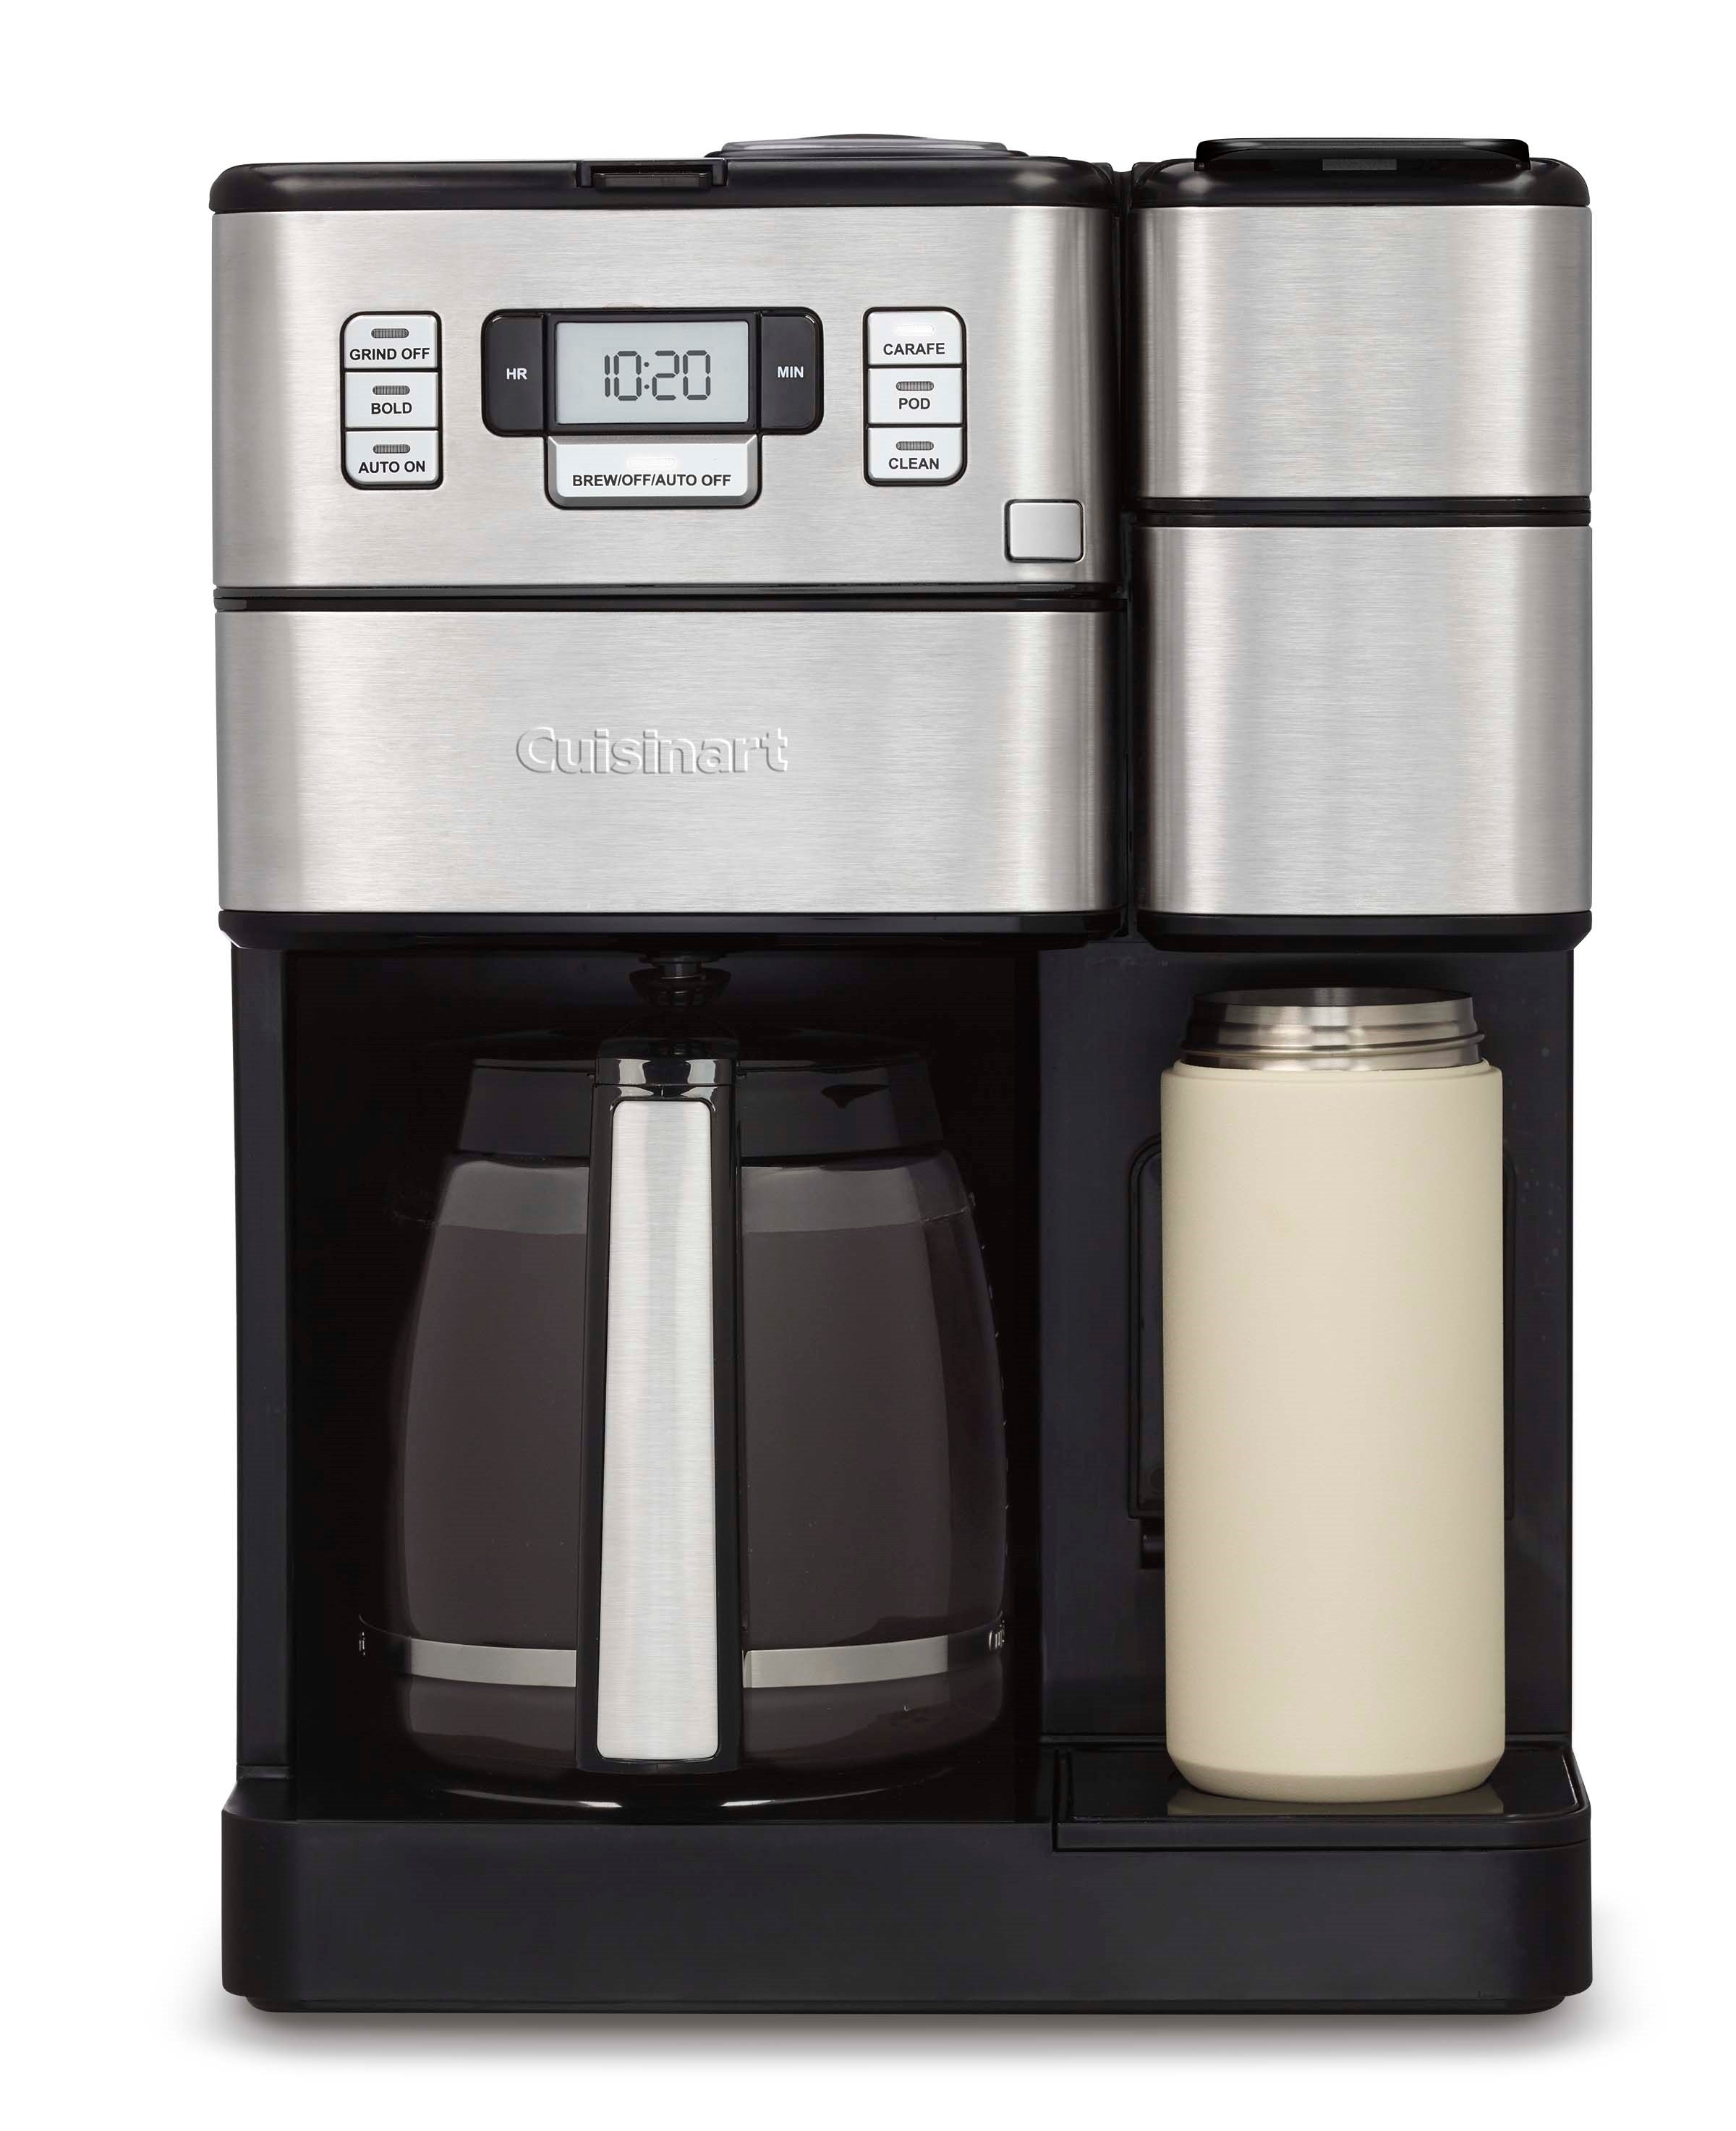 Cuisinart Grind Central 3 oz. Brushed Stainless Steel Blade Coffee